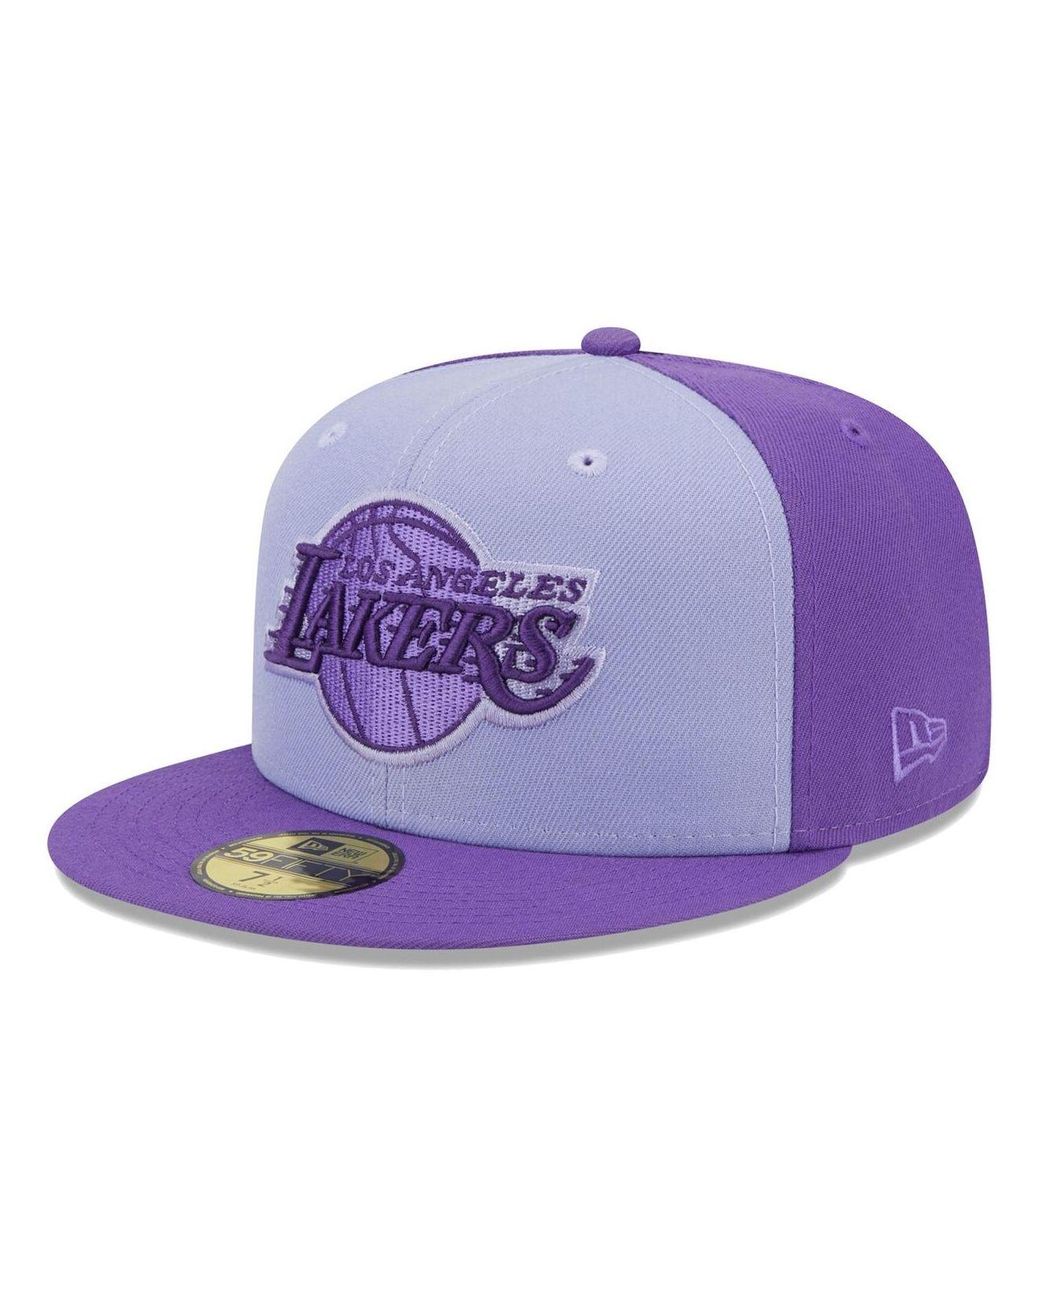 Los Angeles Lakers New Era Two-Tone 59FIFTY Fitted Hat - Light